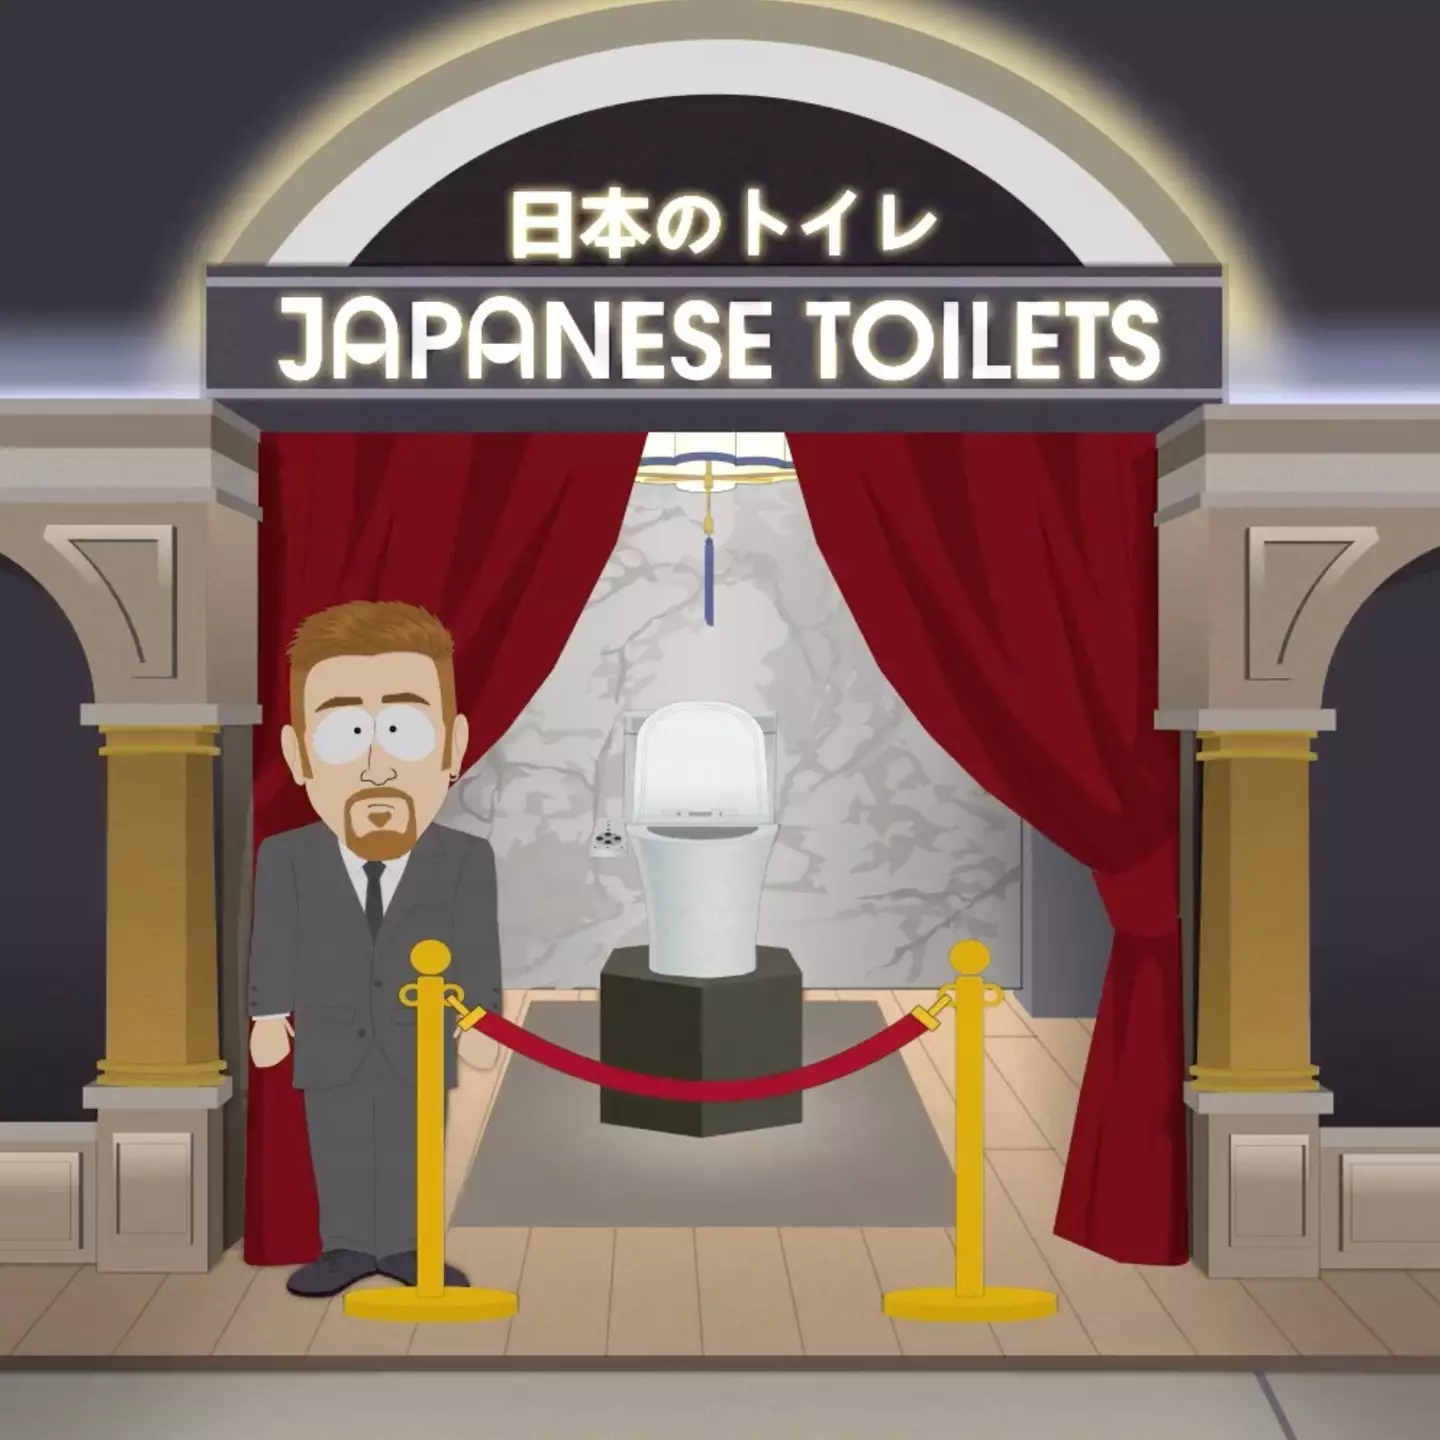 He's ridiculed after buying a Japanese toilet.